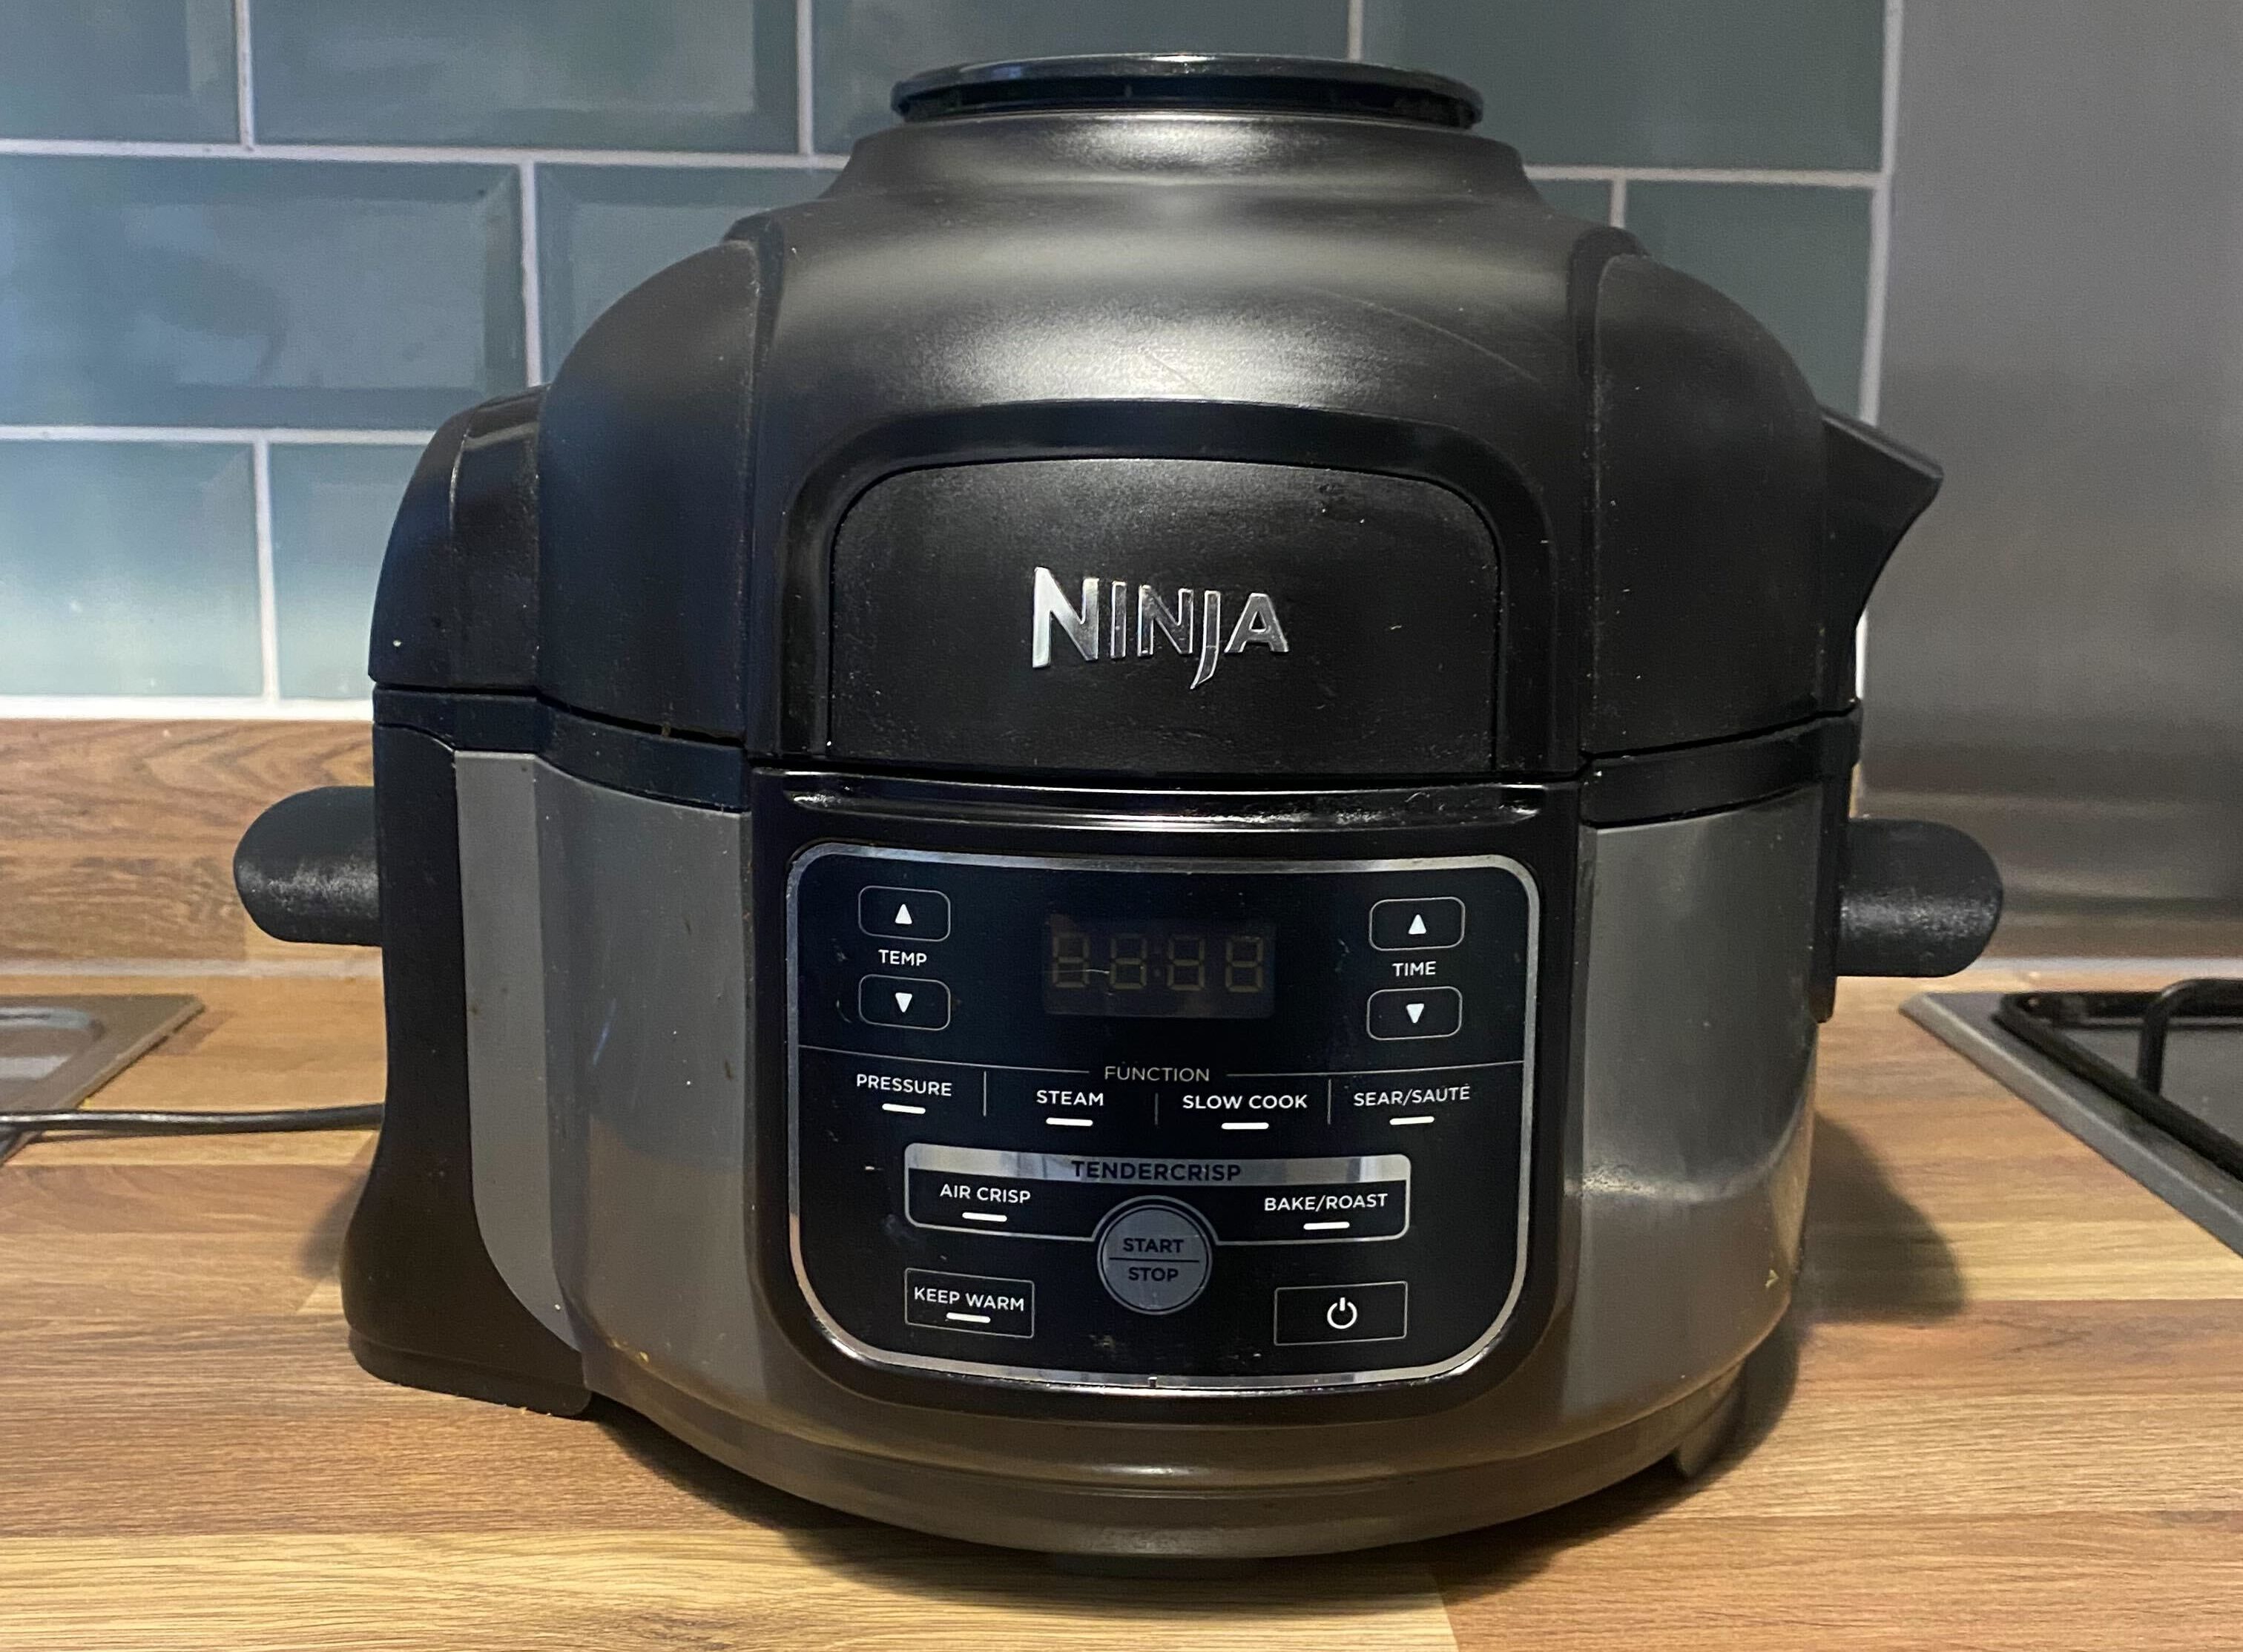 Ninja Foodi Mini 6-in-1 Multi-Cooker tried & tested review - Your Home Style